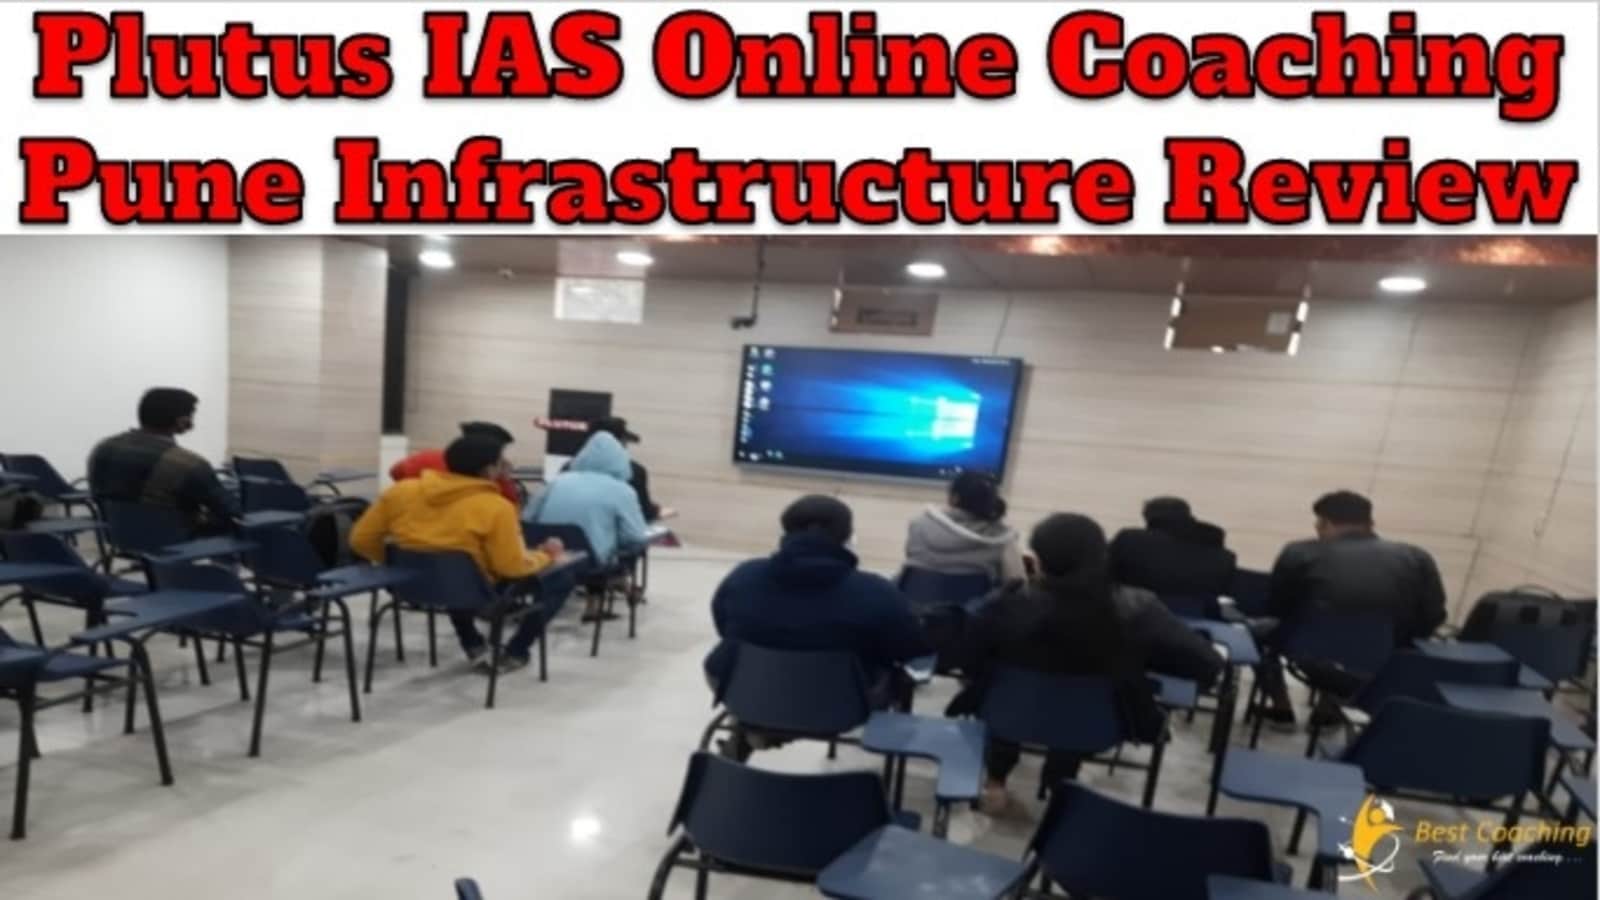 Plutus IAS Online Coaching Pune Infrastructure Review